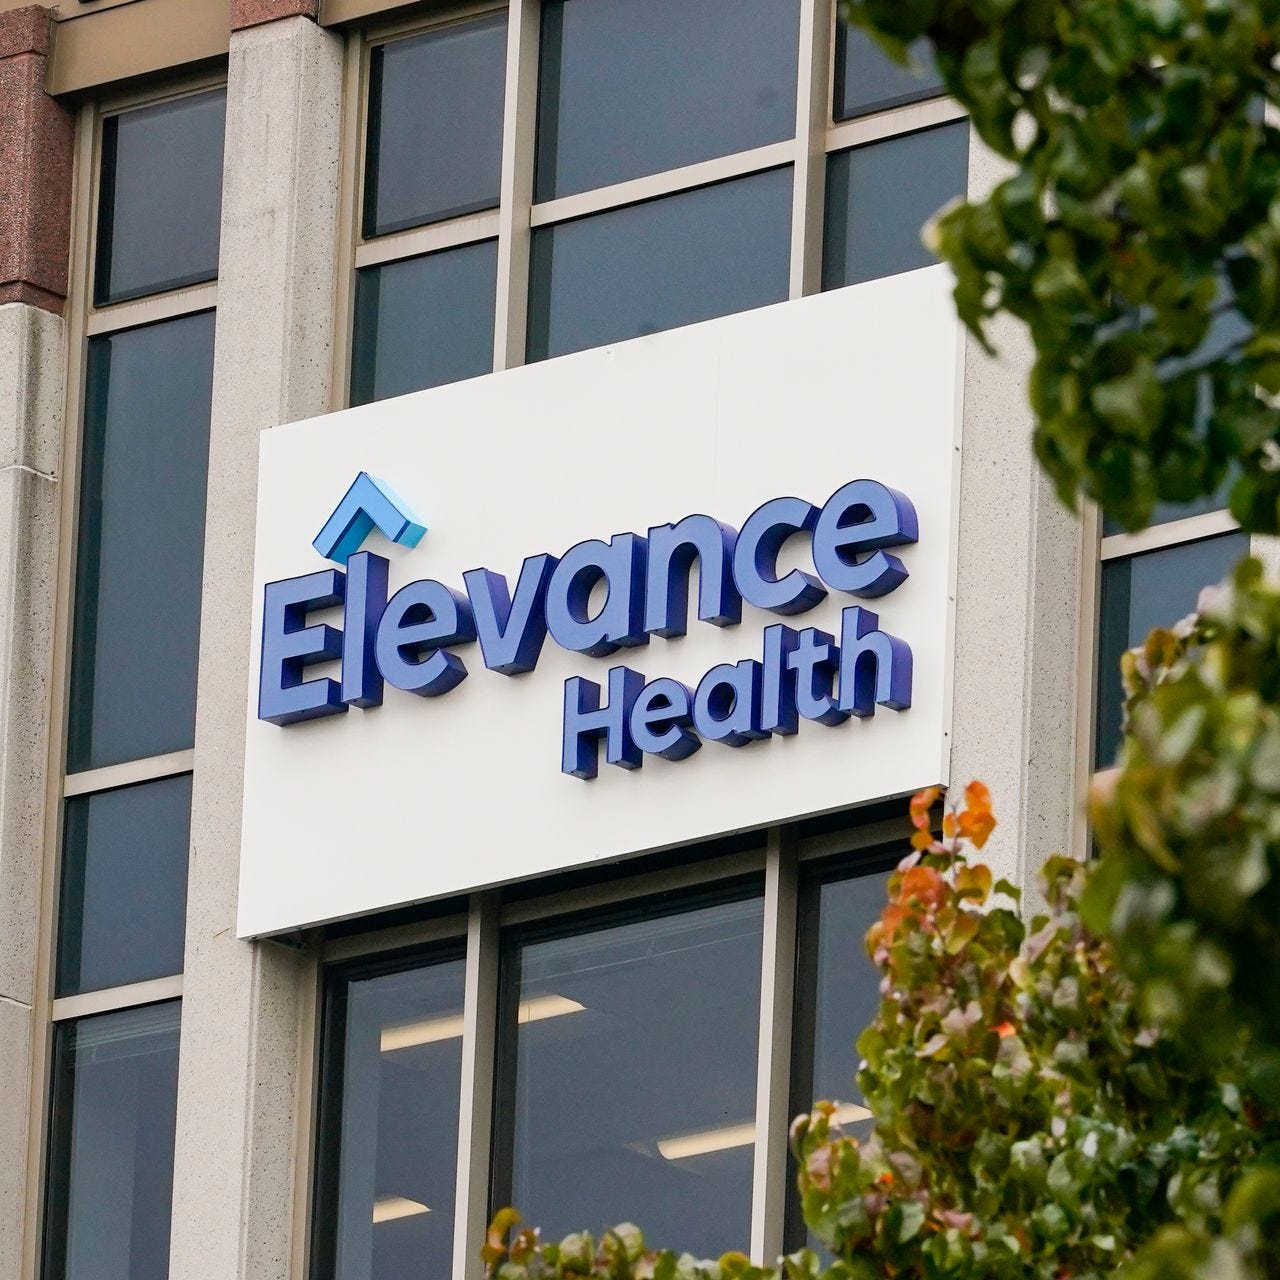 Elevance Health Revenue Lifted by Higher Premiums - WSJ